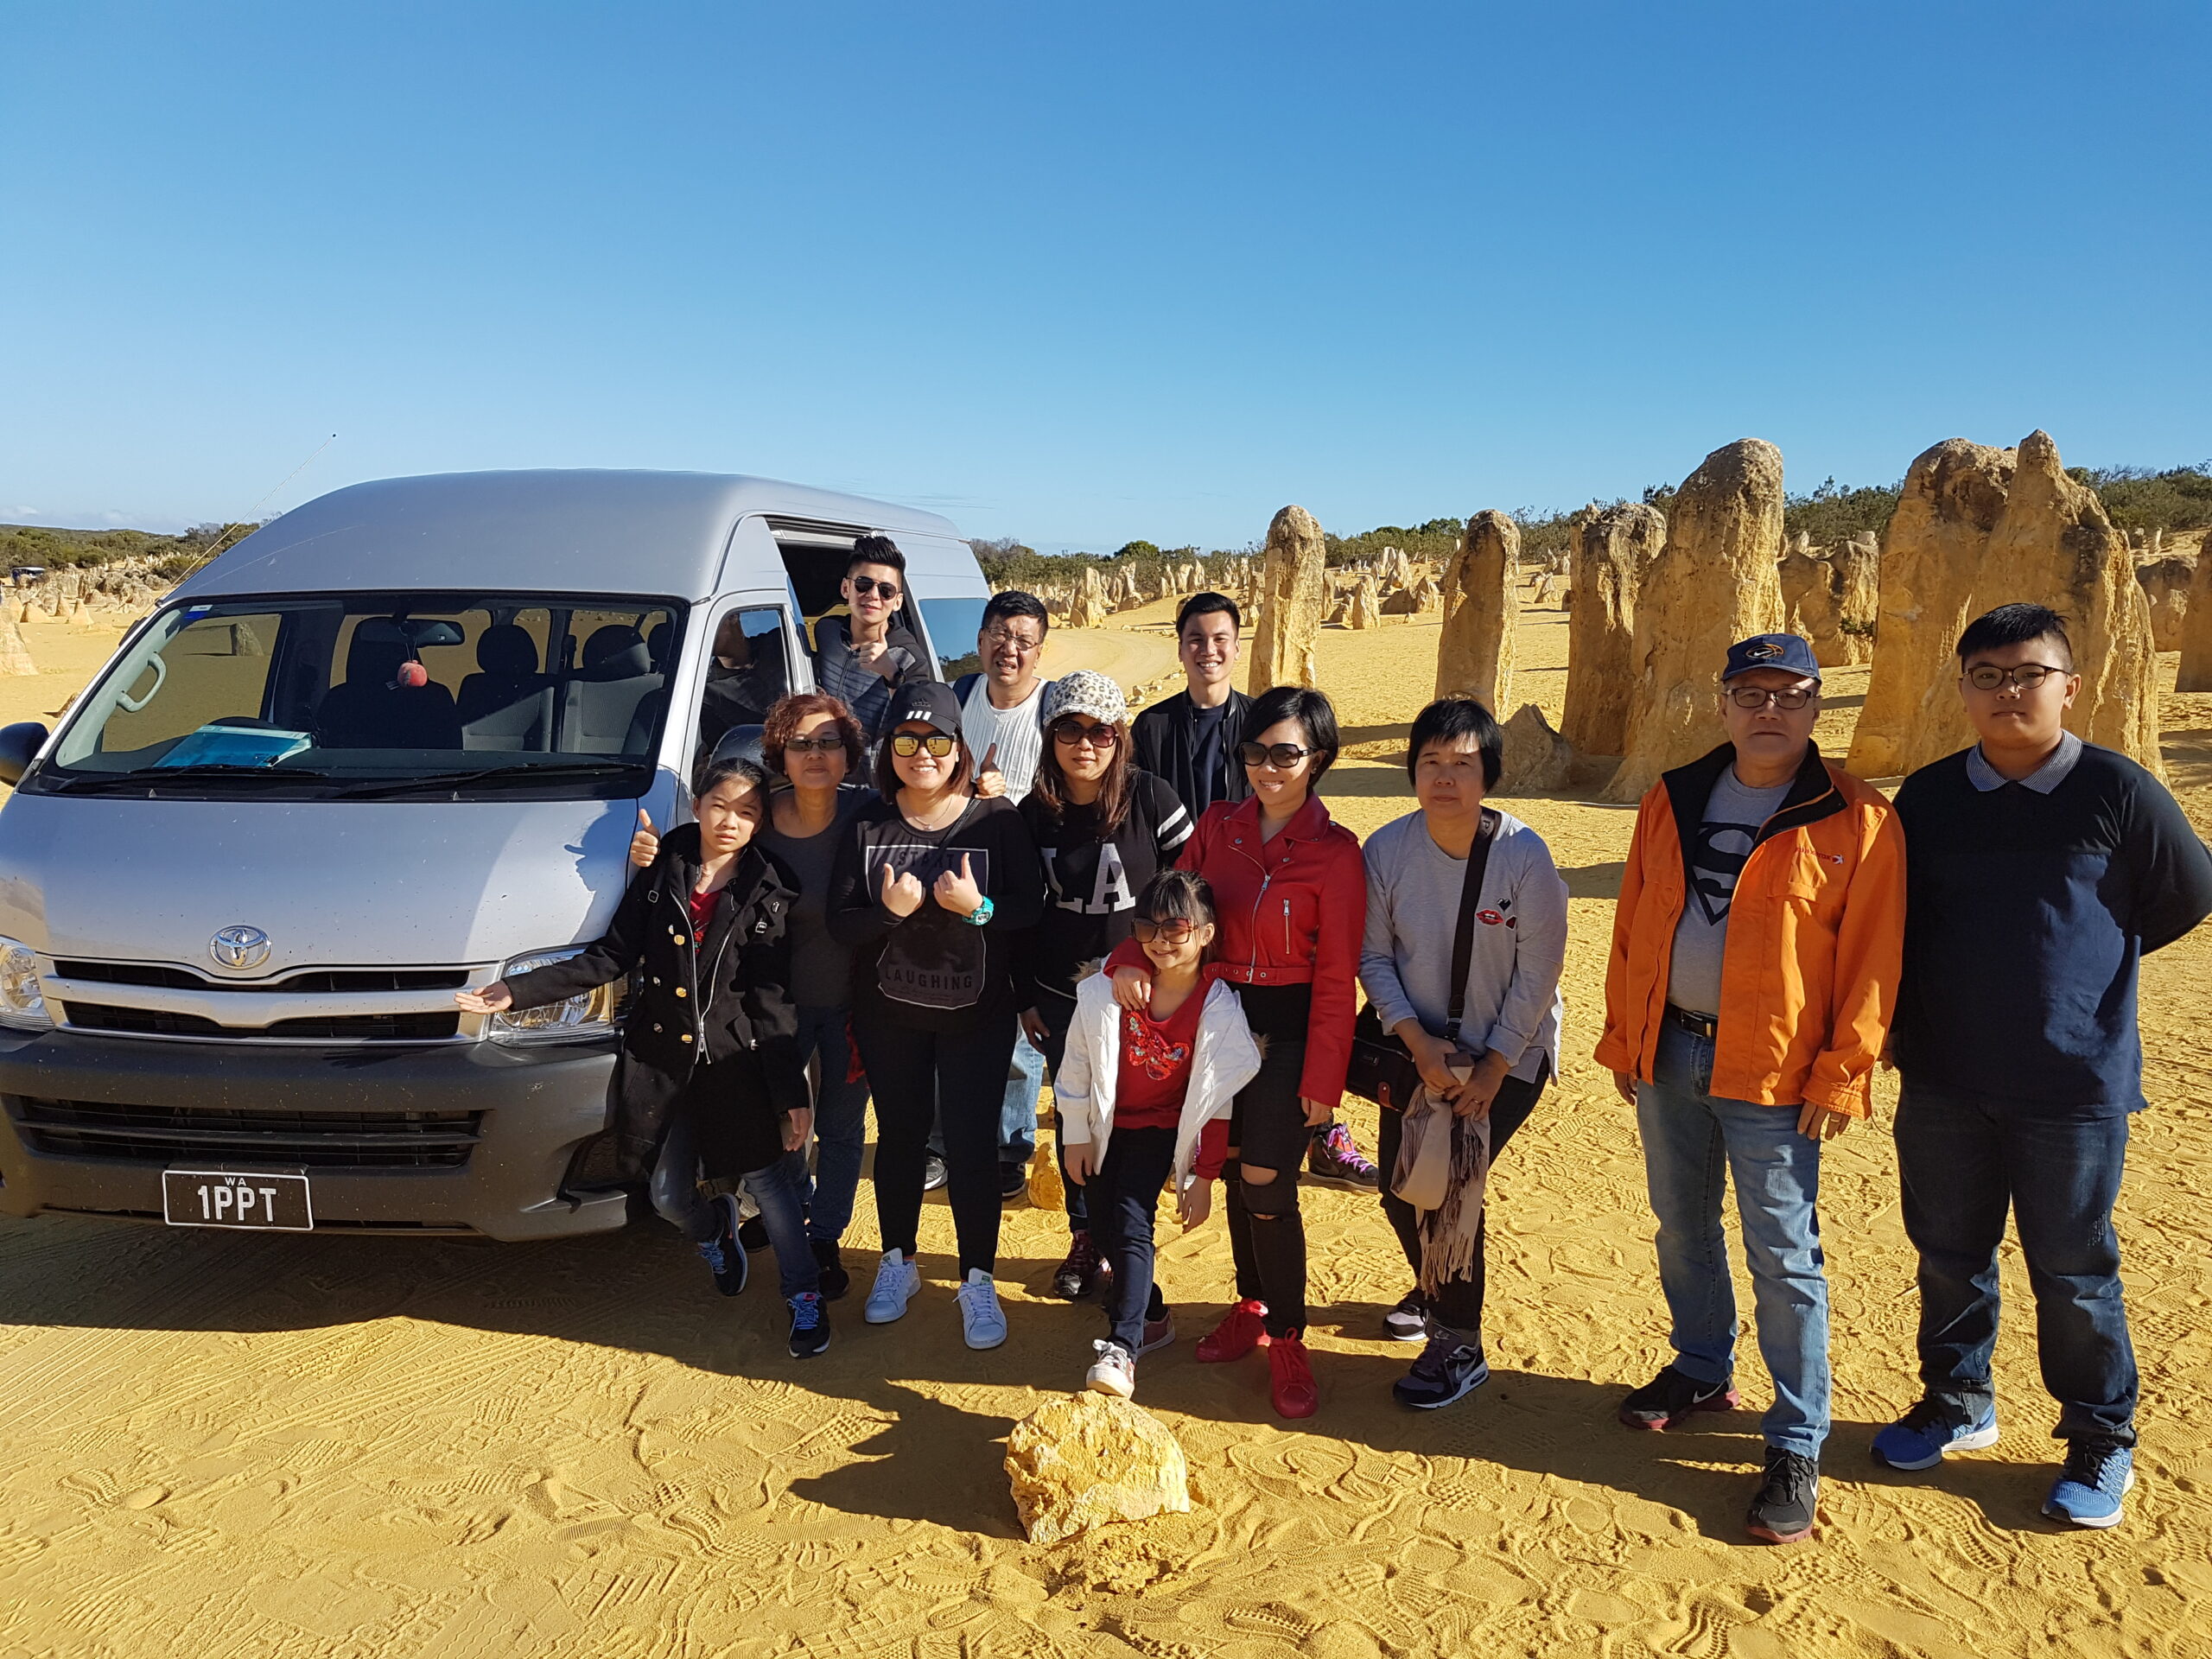 Caversham Wildlife Park, Lobster Shack, and Pinnacles private full day tour